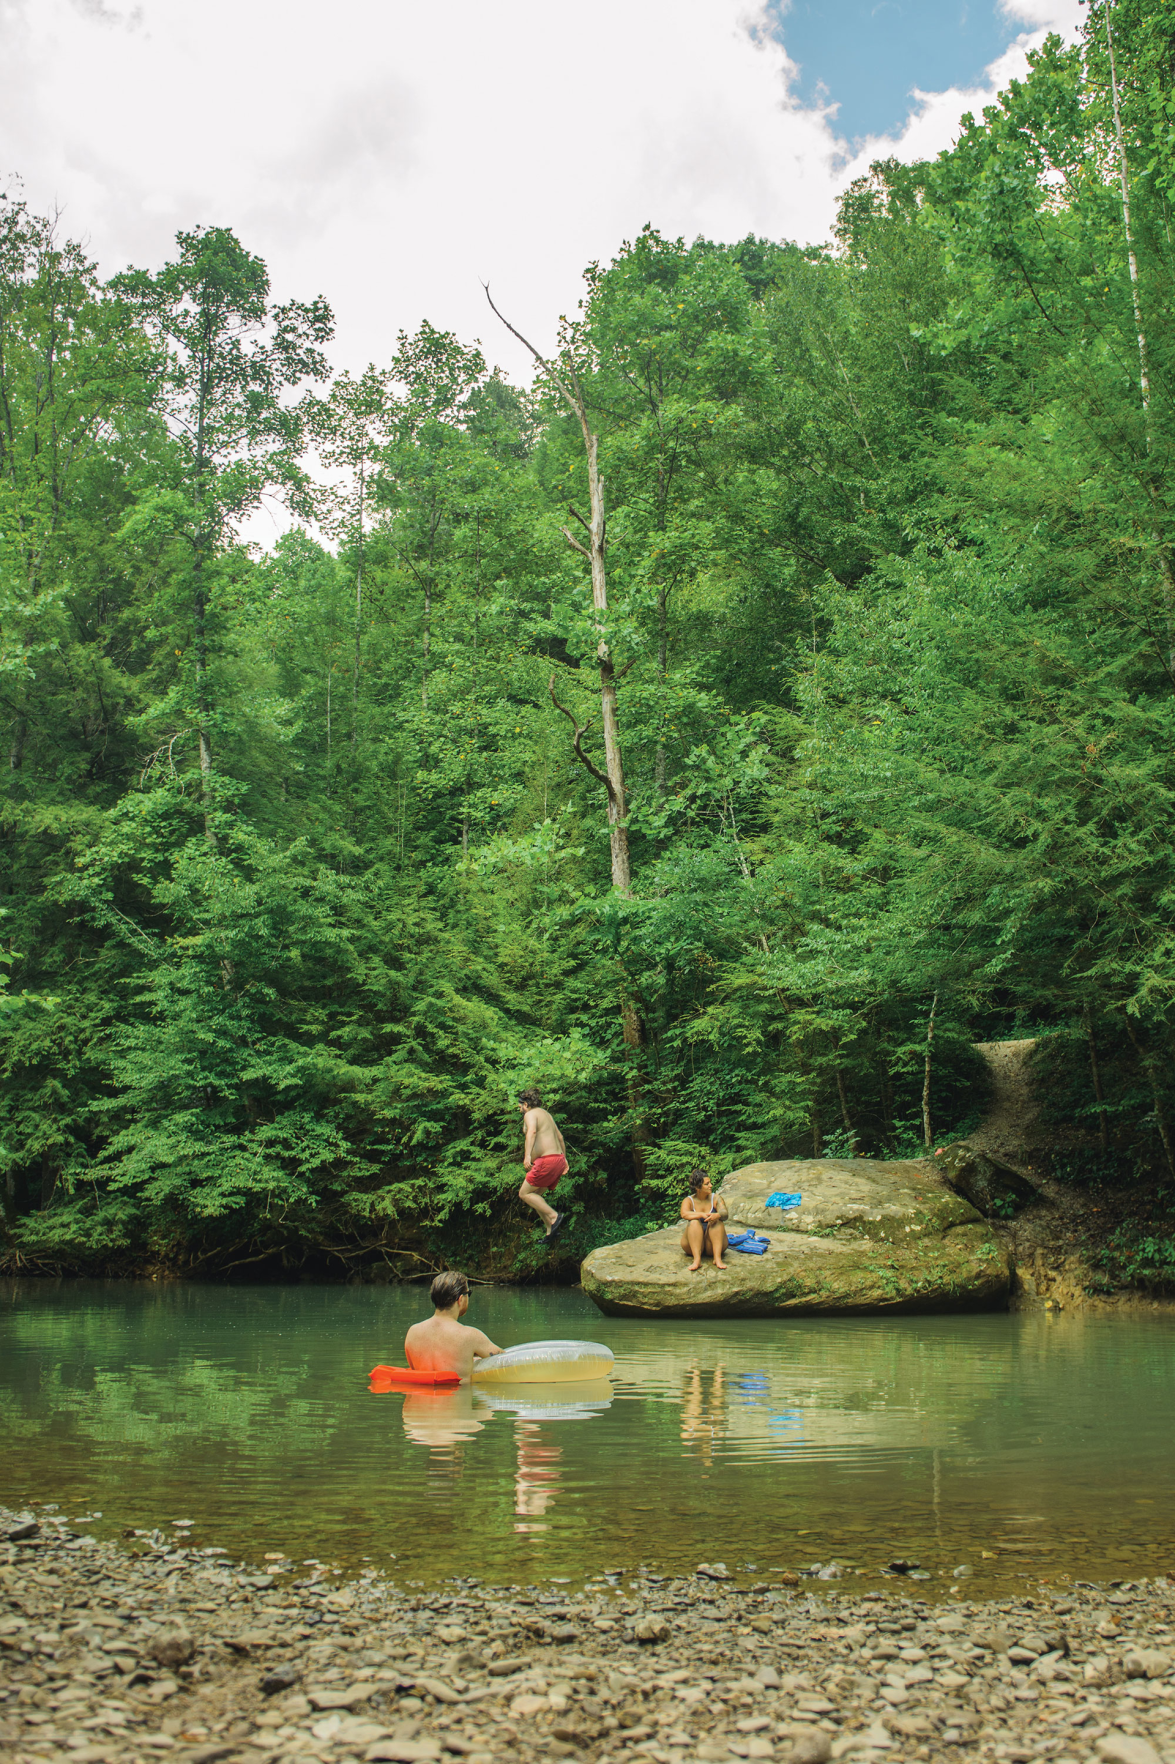 The Road Trip Issue 2020: Red River Gorge, Kentucky